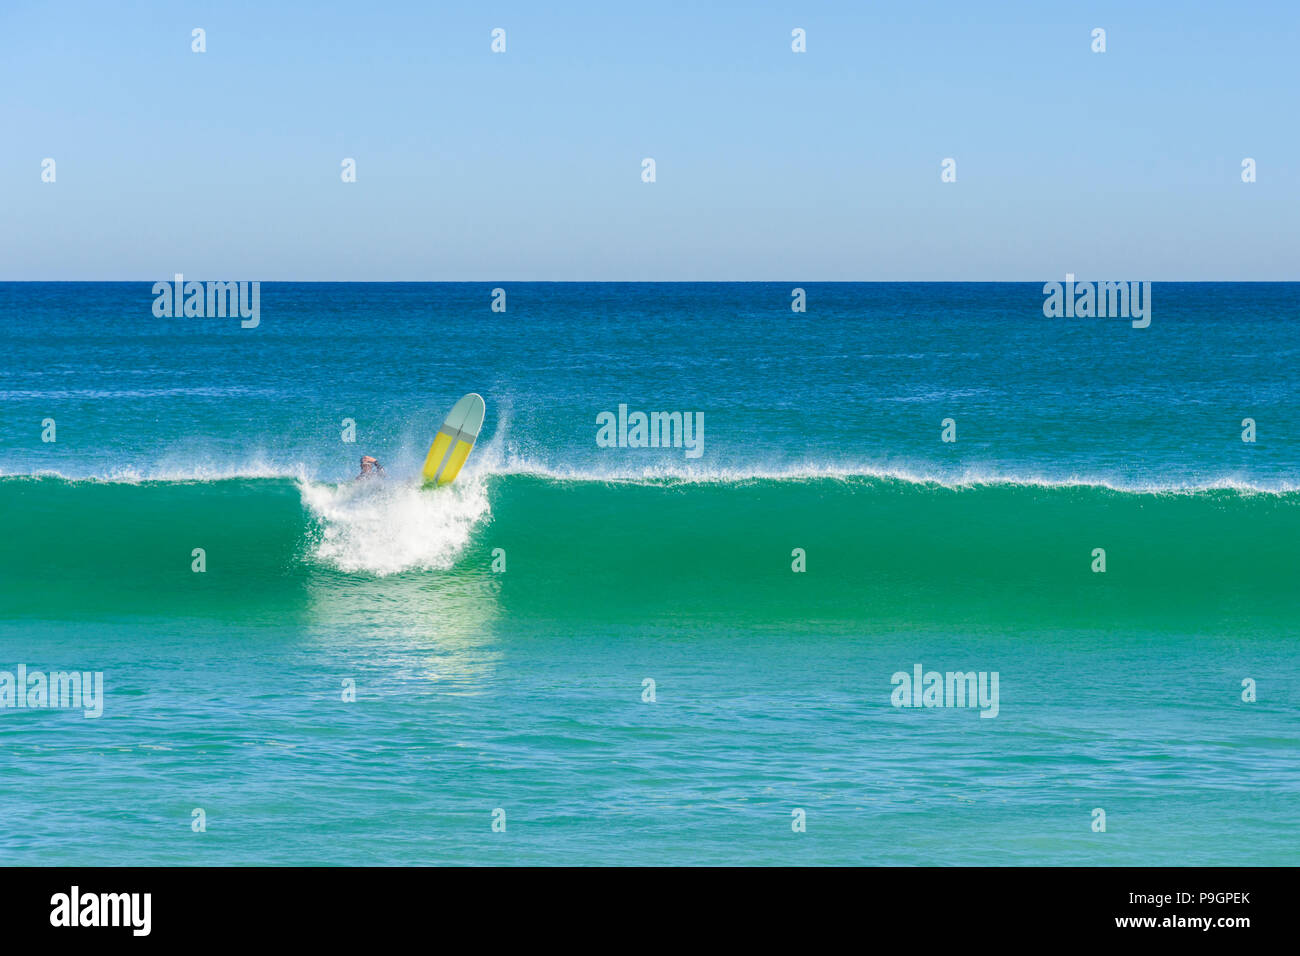 Surfer wipeout on a small beach break wave at Scarborough Beach, Western Australia Stock Photo